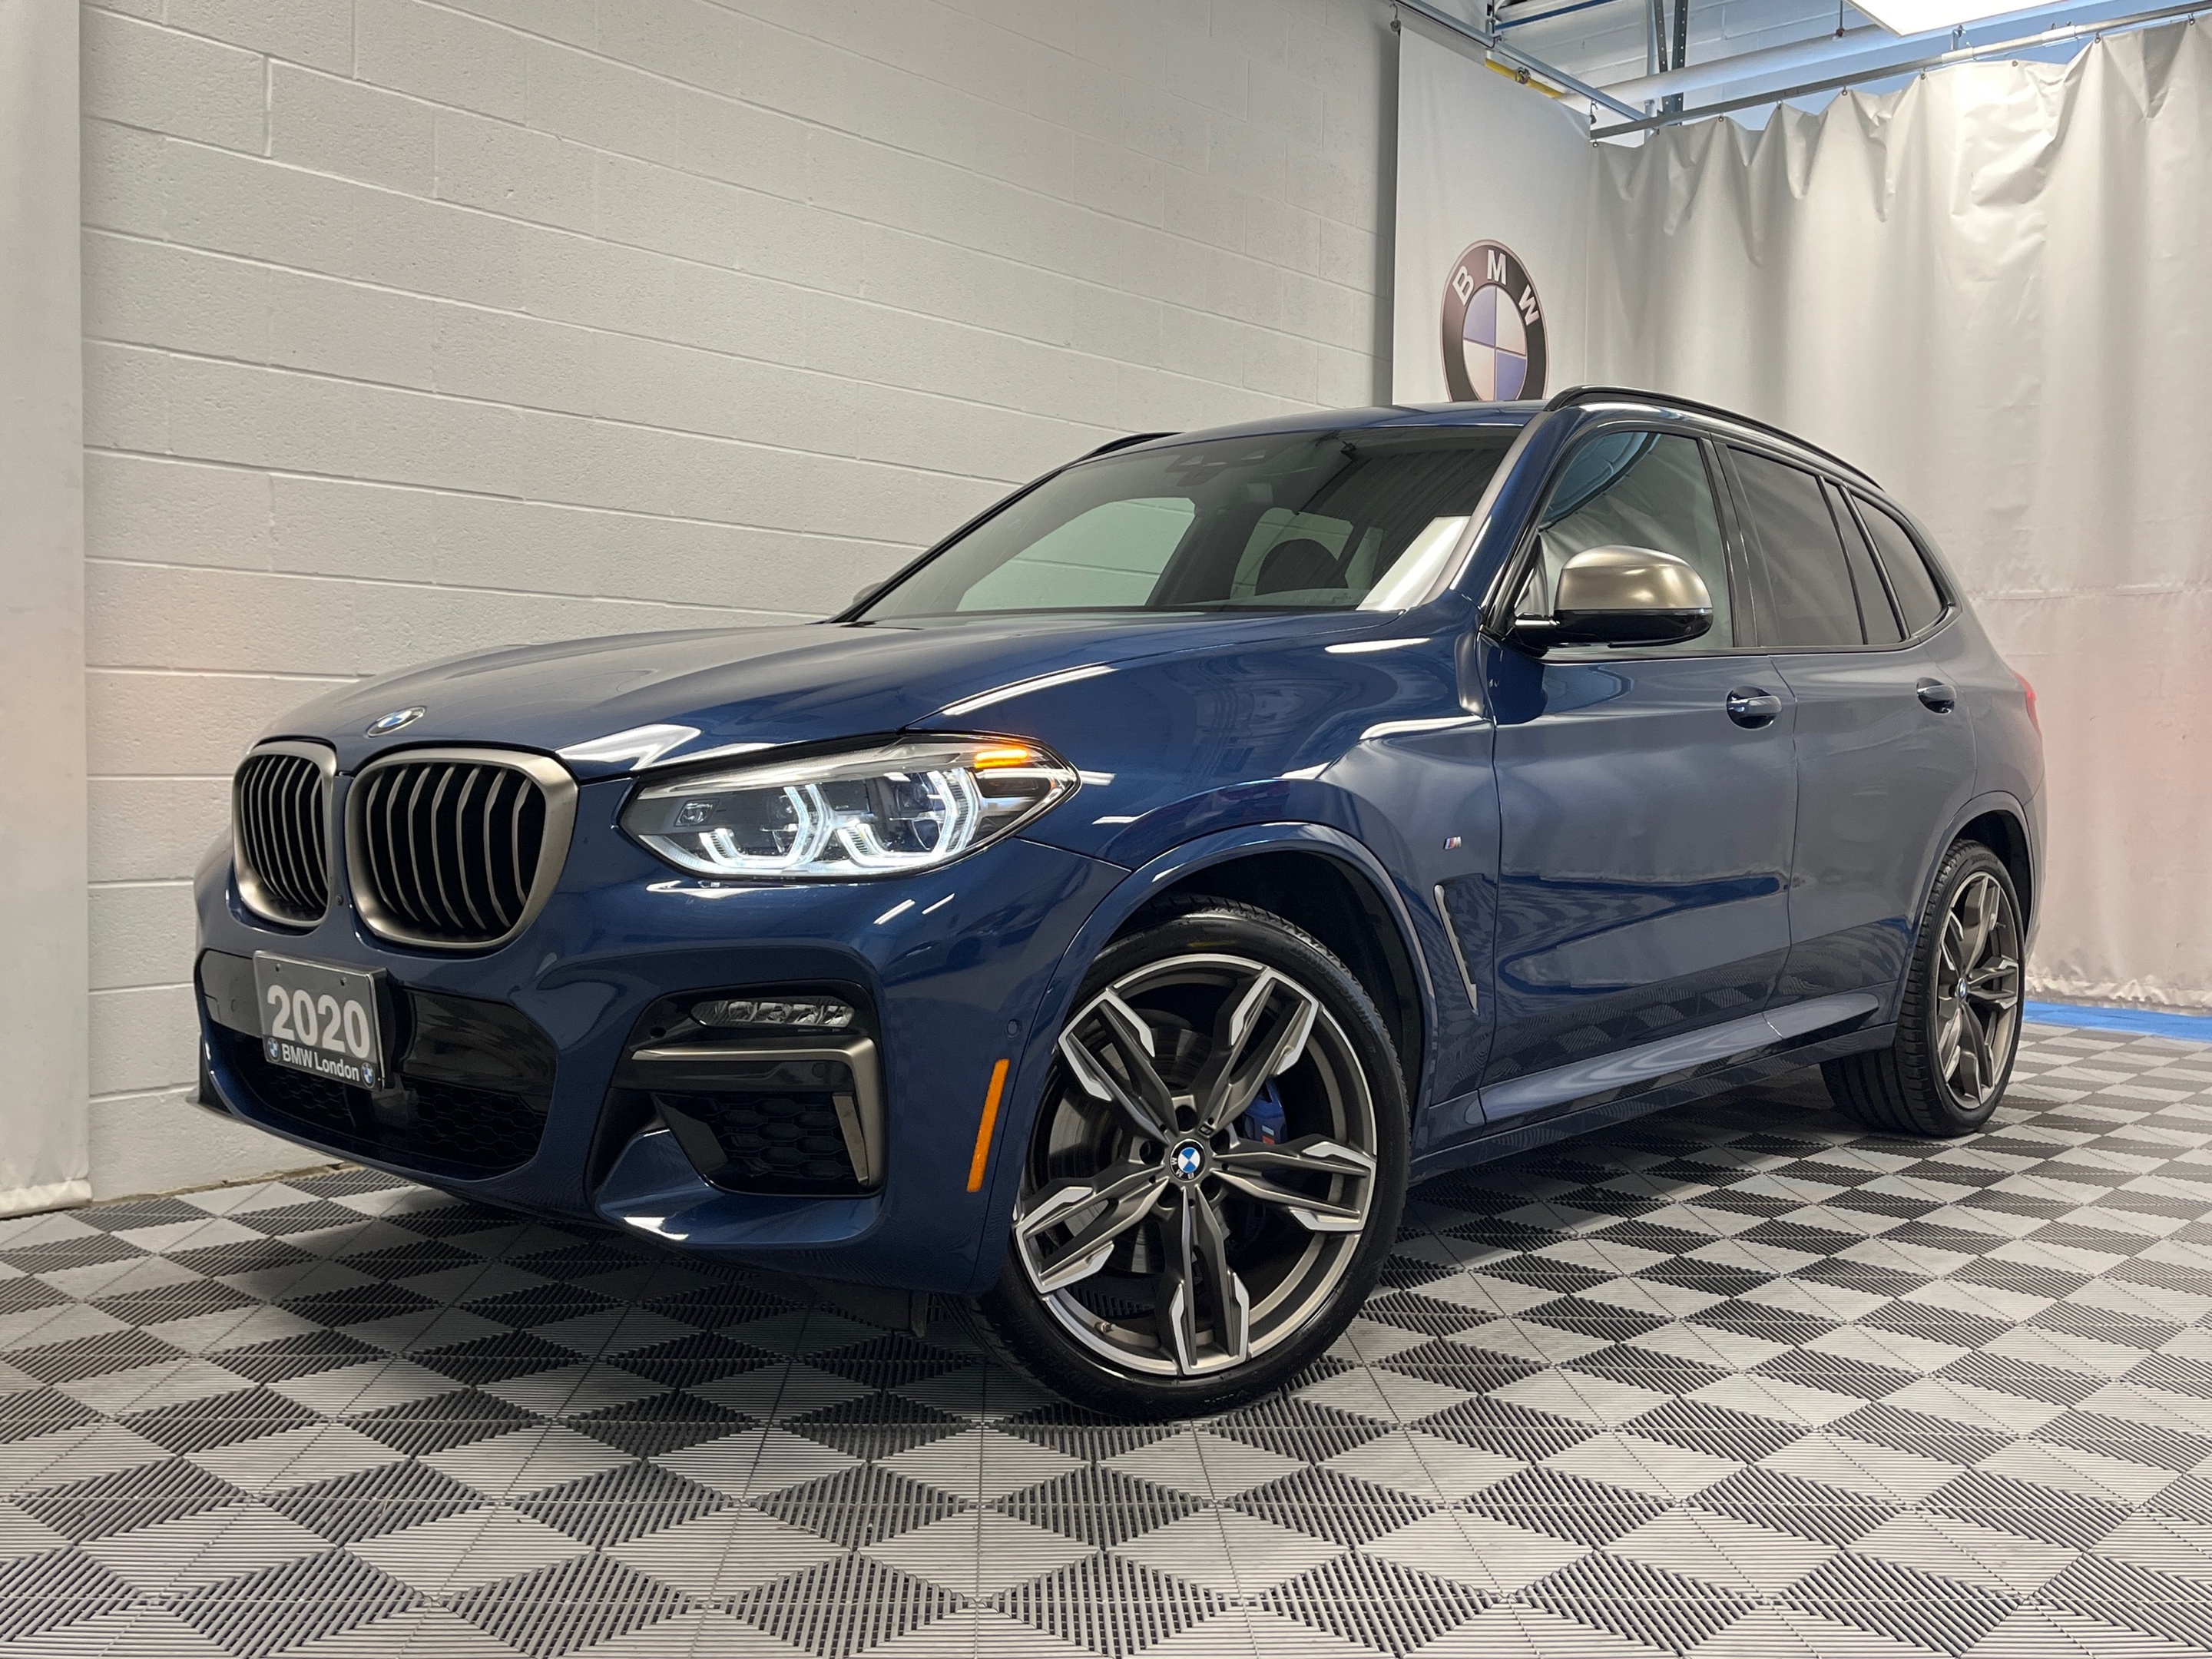 2020 BMW X3 382 HP | as low as 2.99% | Driving Assistant Plus 